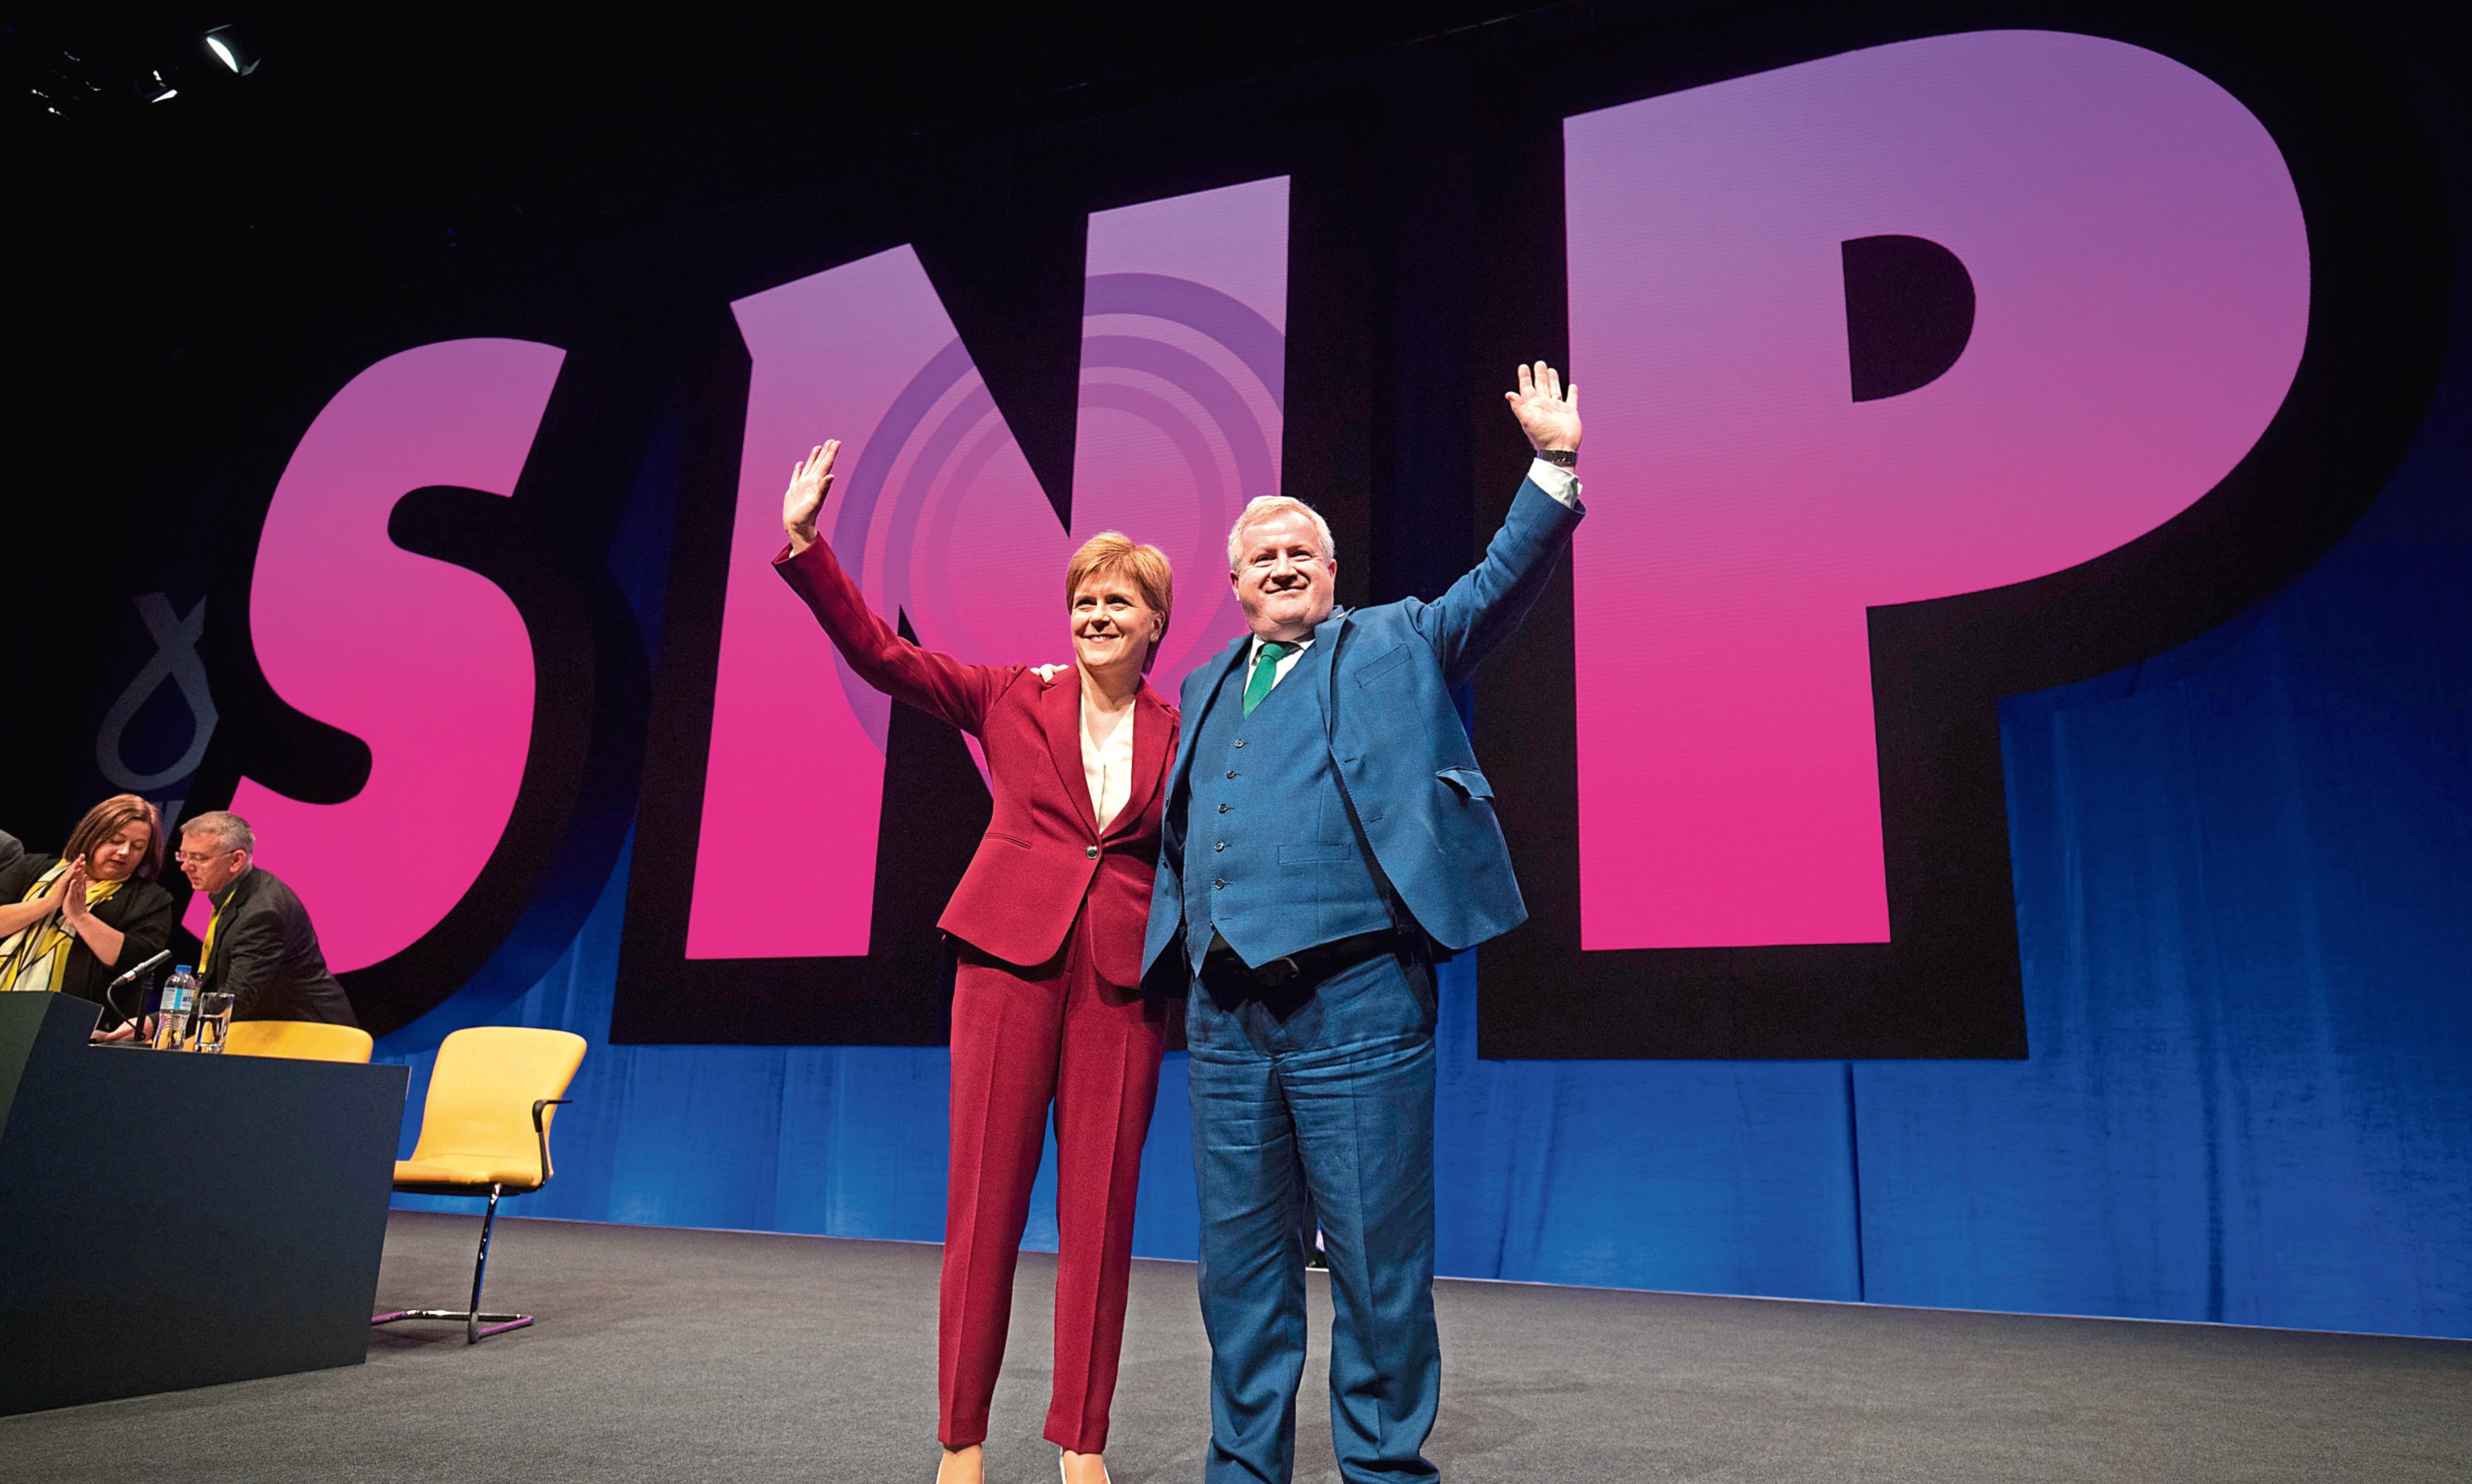 First Minister Nicola Sturgeon with Ian Blackford at the opening of the 2019 SNP autumn conference in Aberdeen in autumn.